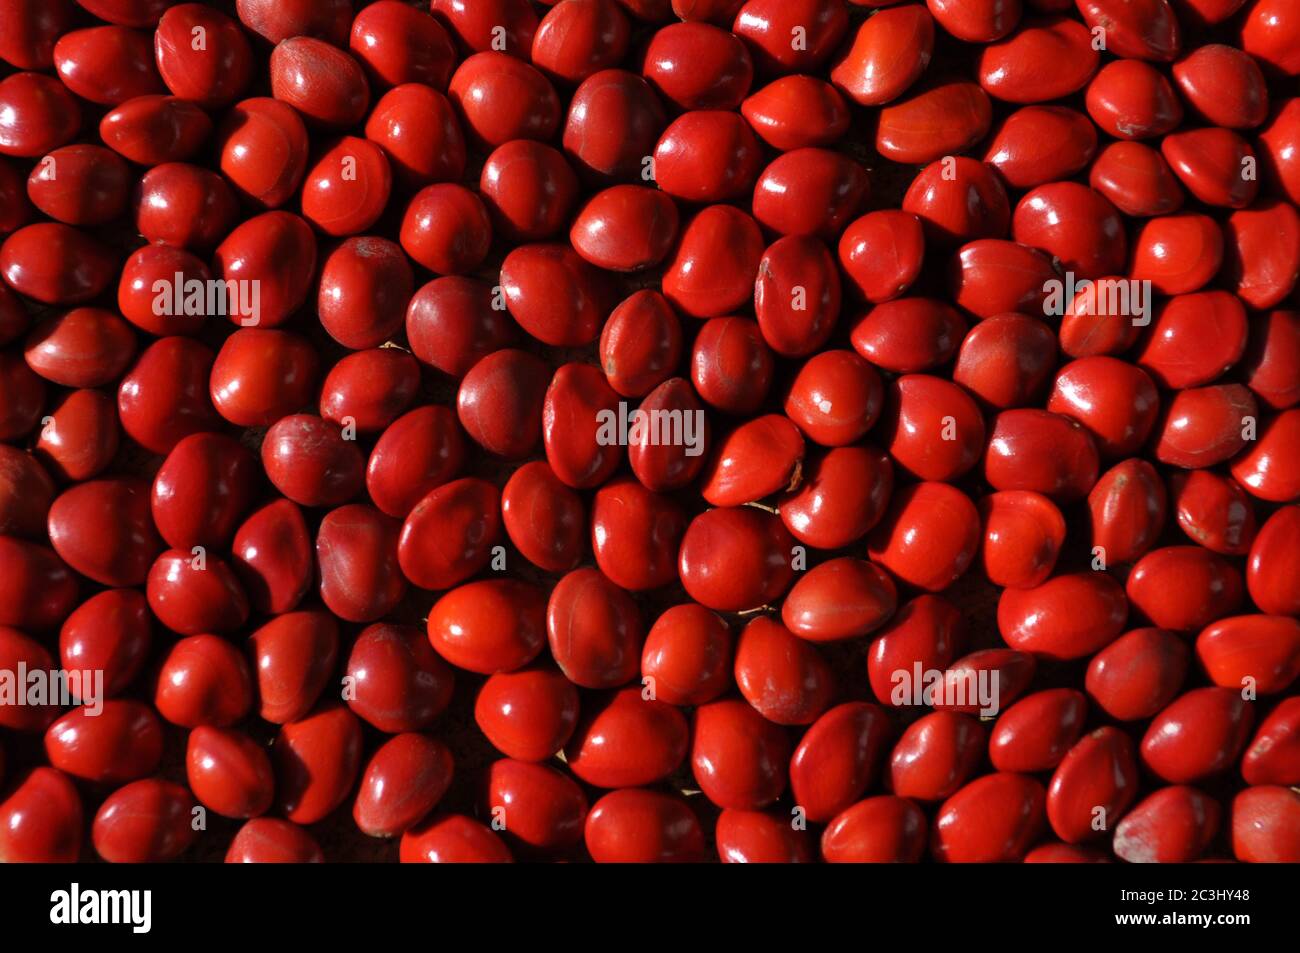 Red seeds or jumbie beads,  from the pods of the Acacia Coral tree, or Bead tree, also known as Adenanthera pavonina Stock Photo